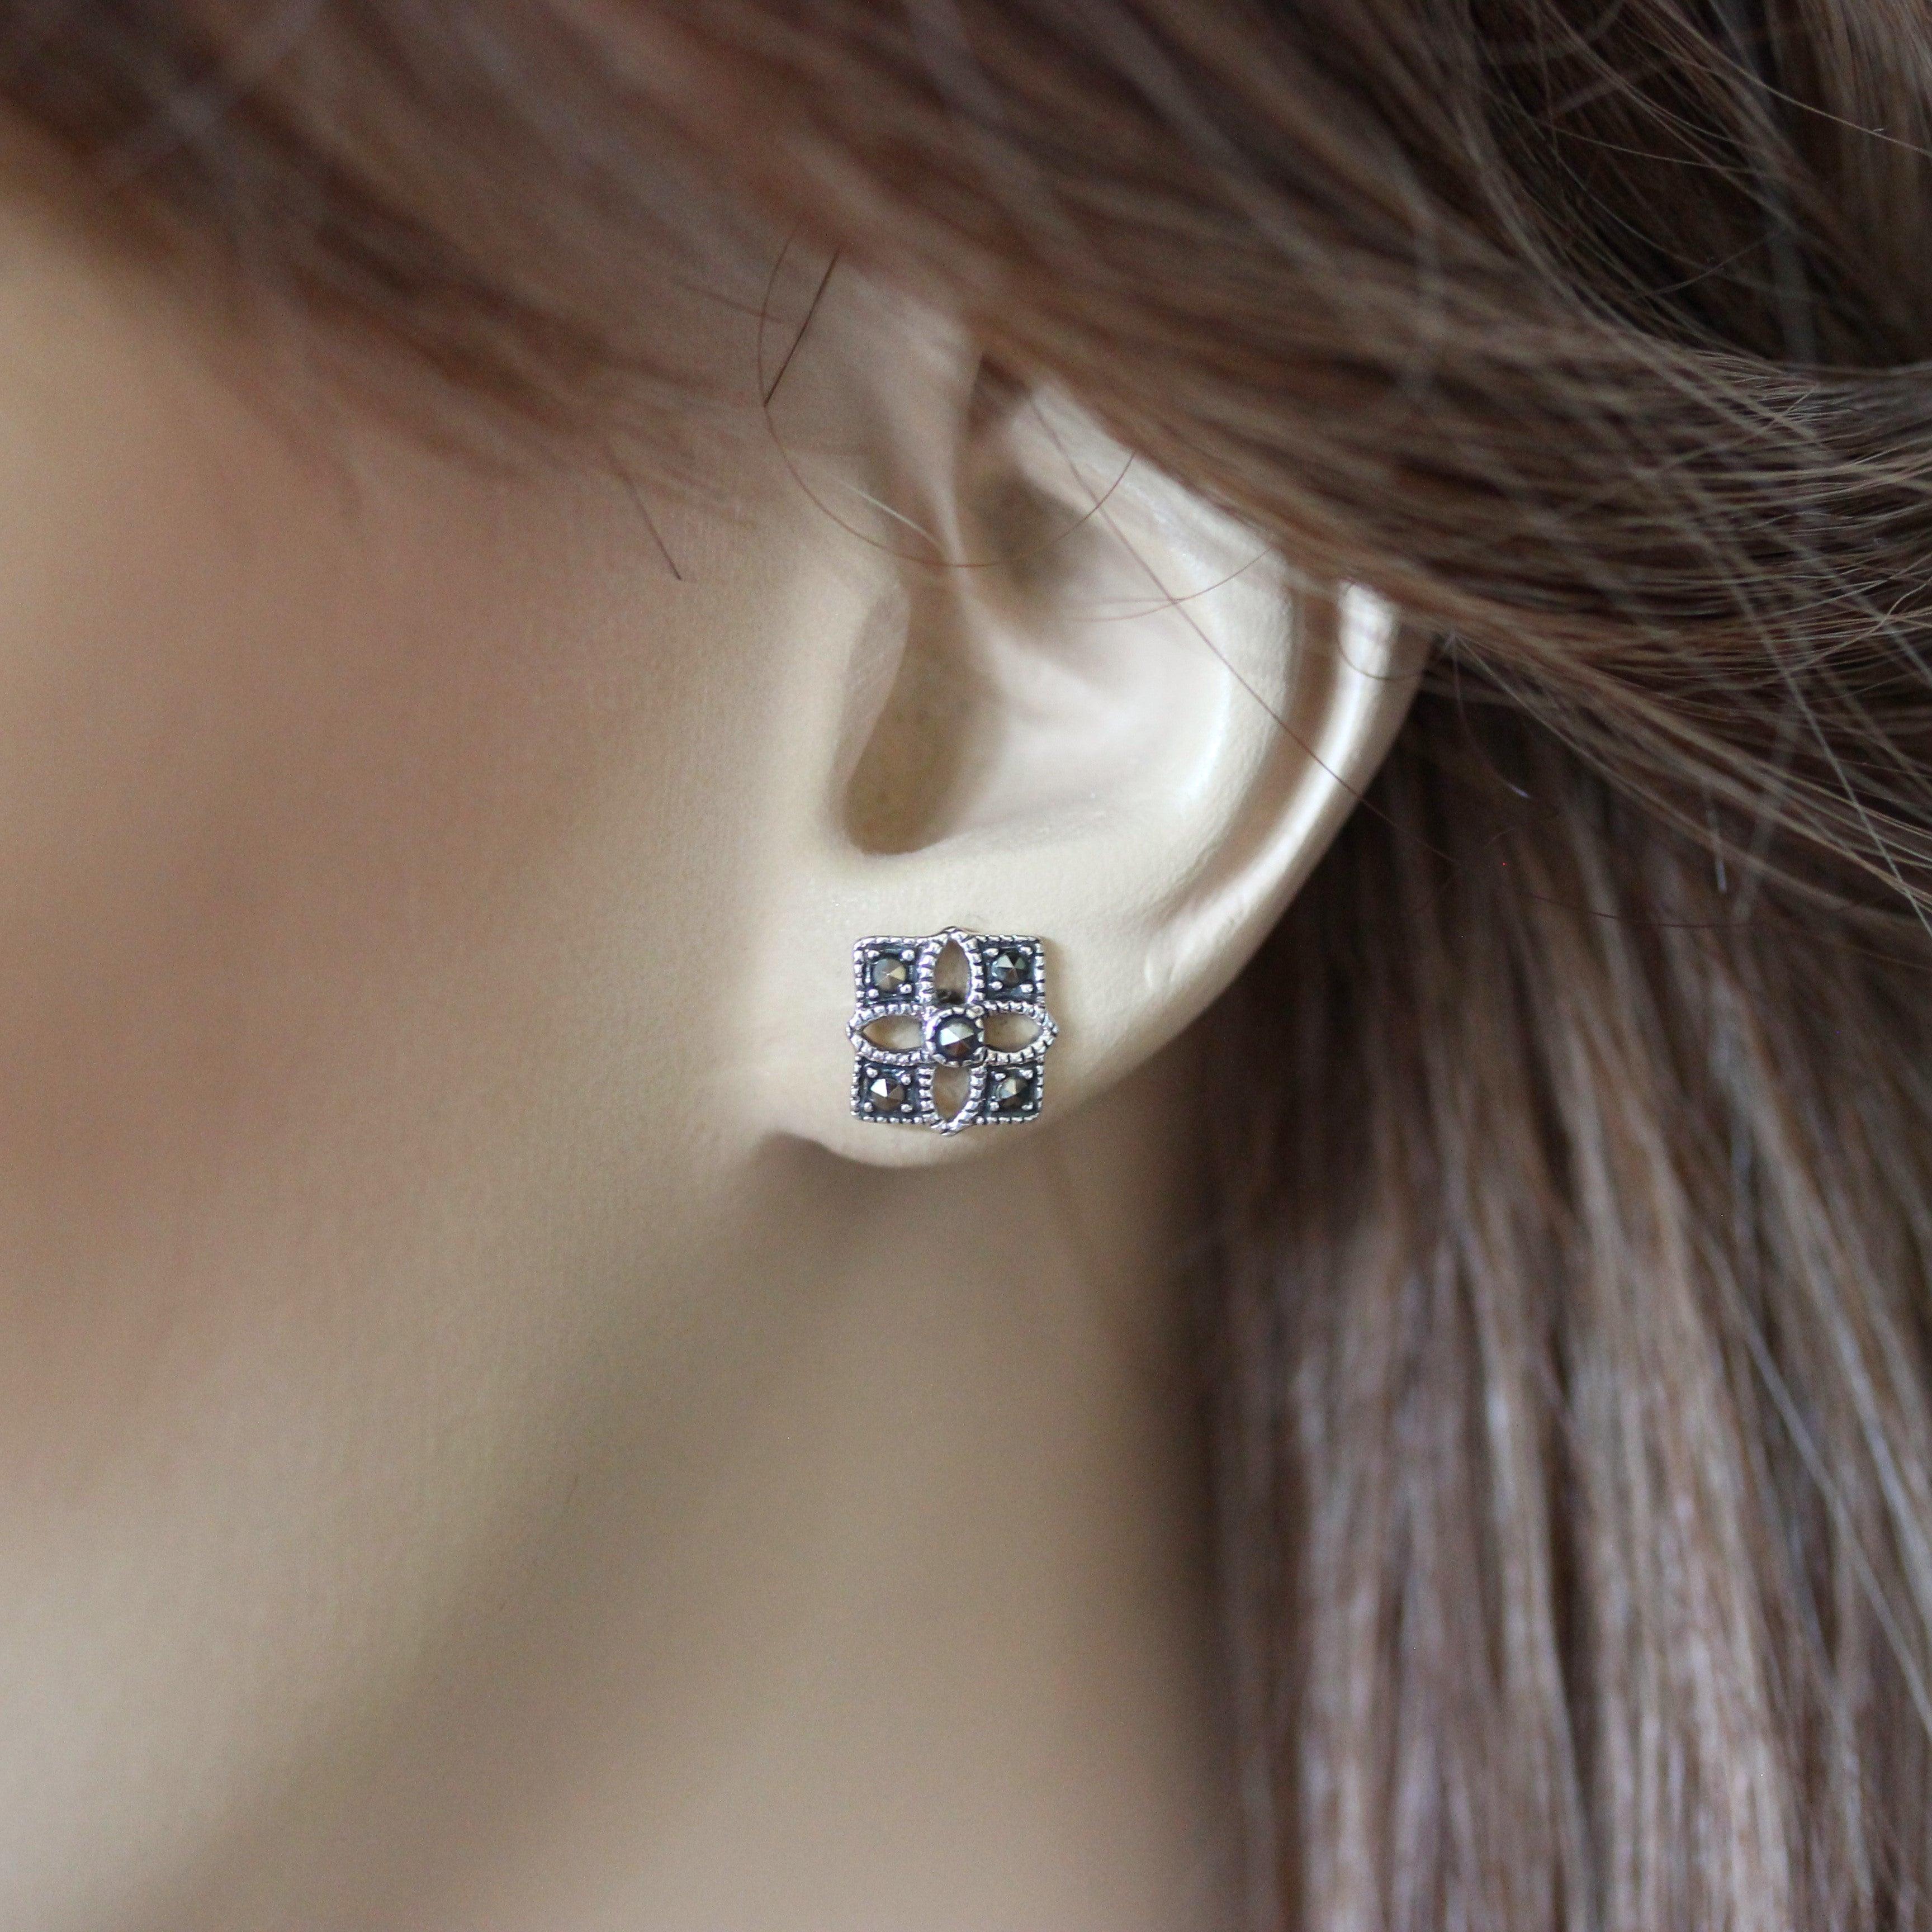 Sterling Silver Art Deco Style Marcasite 8mm Square Stud Earrings - STERLING SILVER DESIGNS